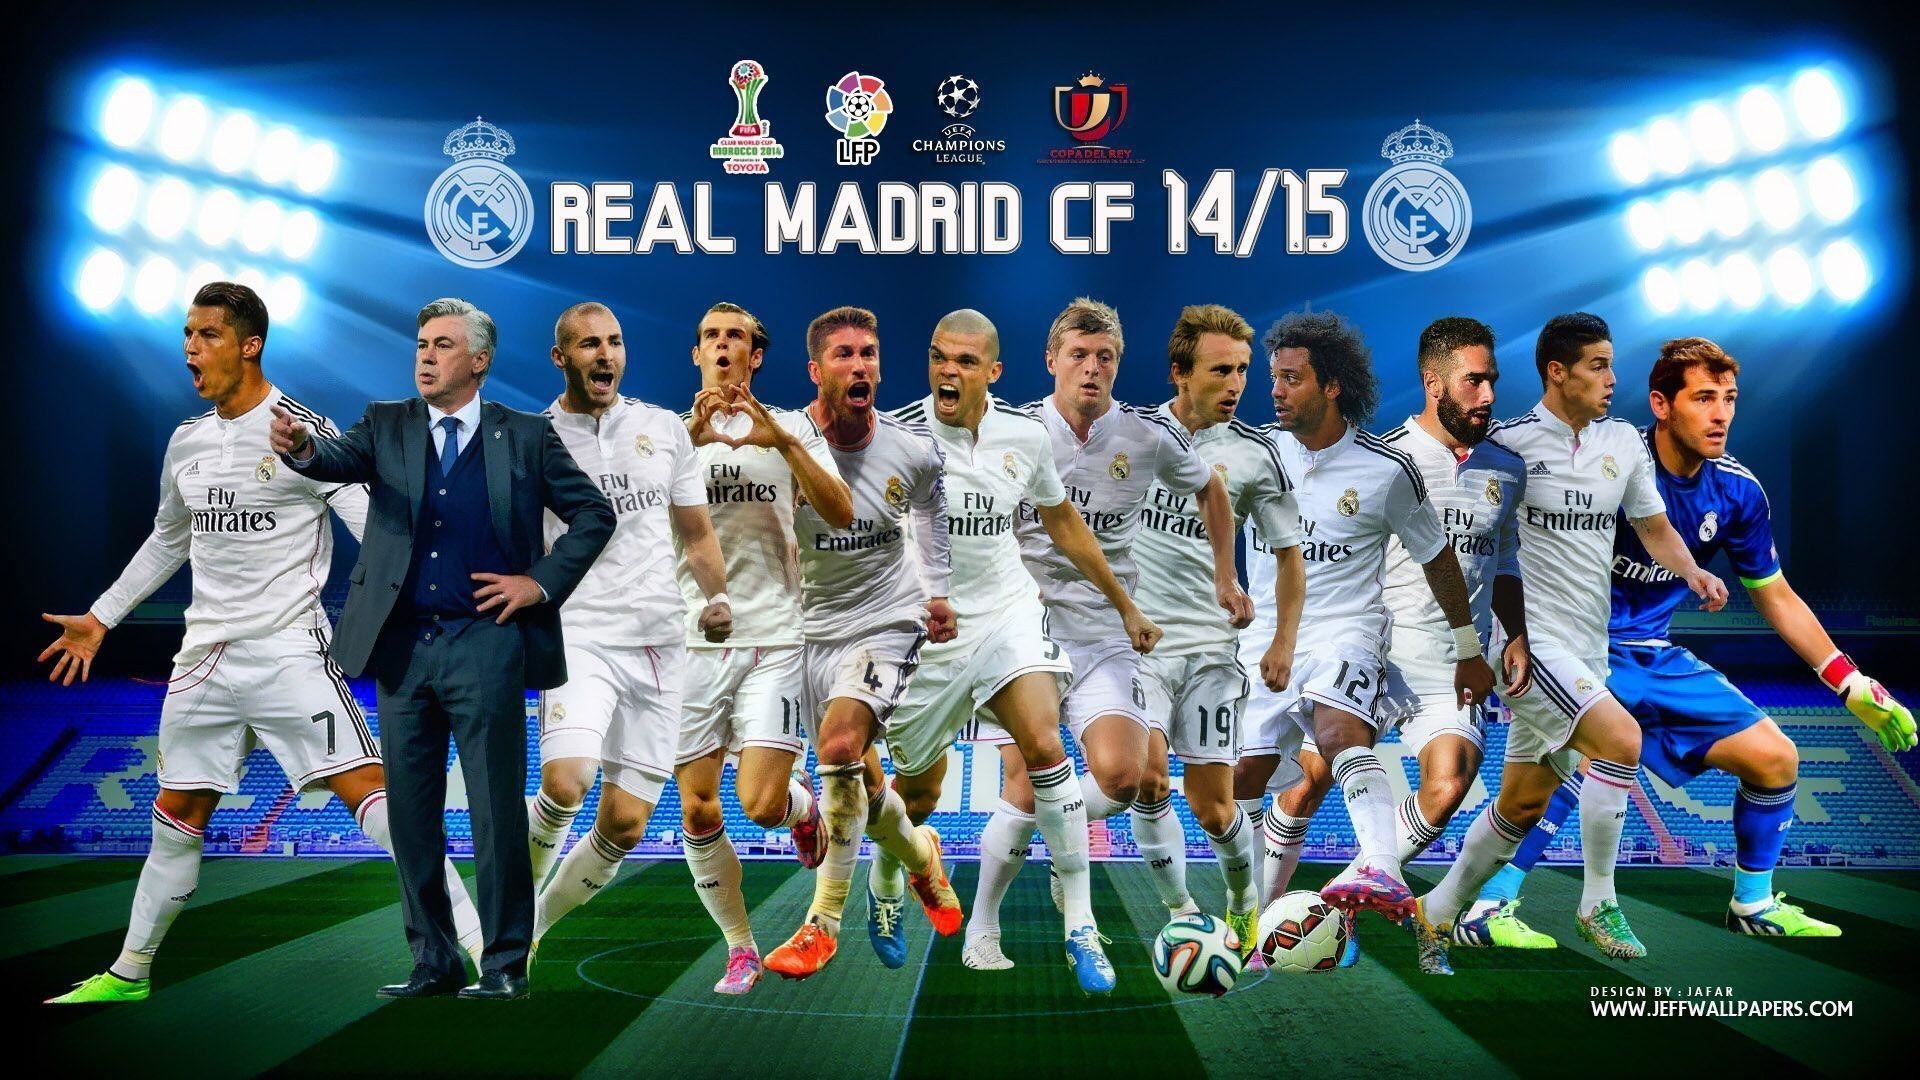 Real Madrid Celebrating Wallpapers HD 2018